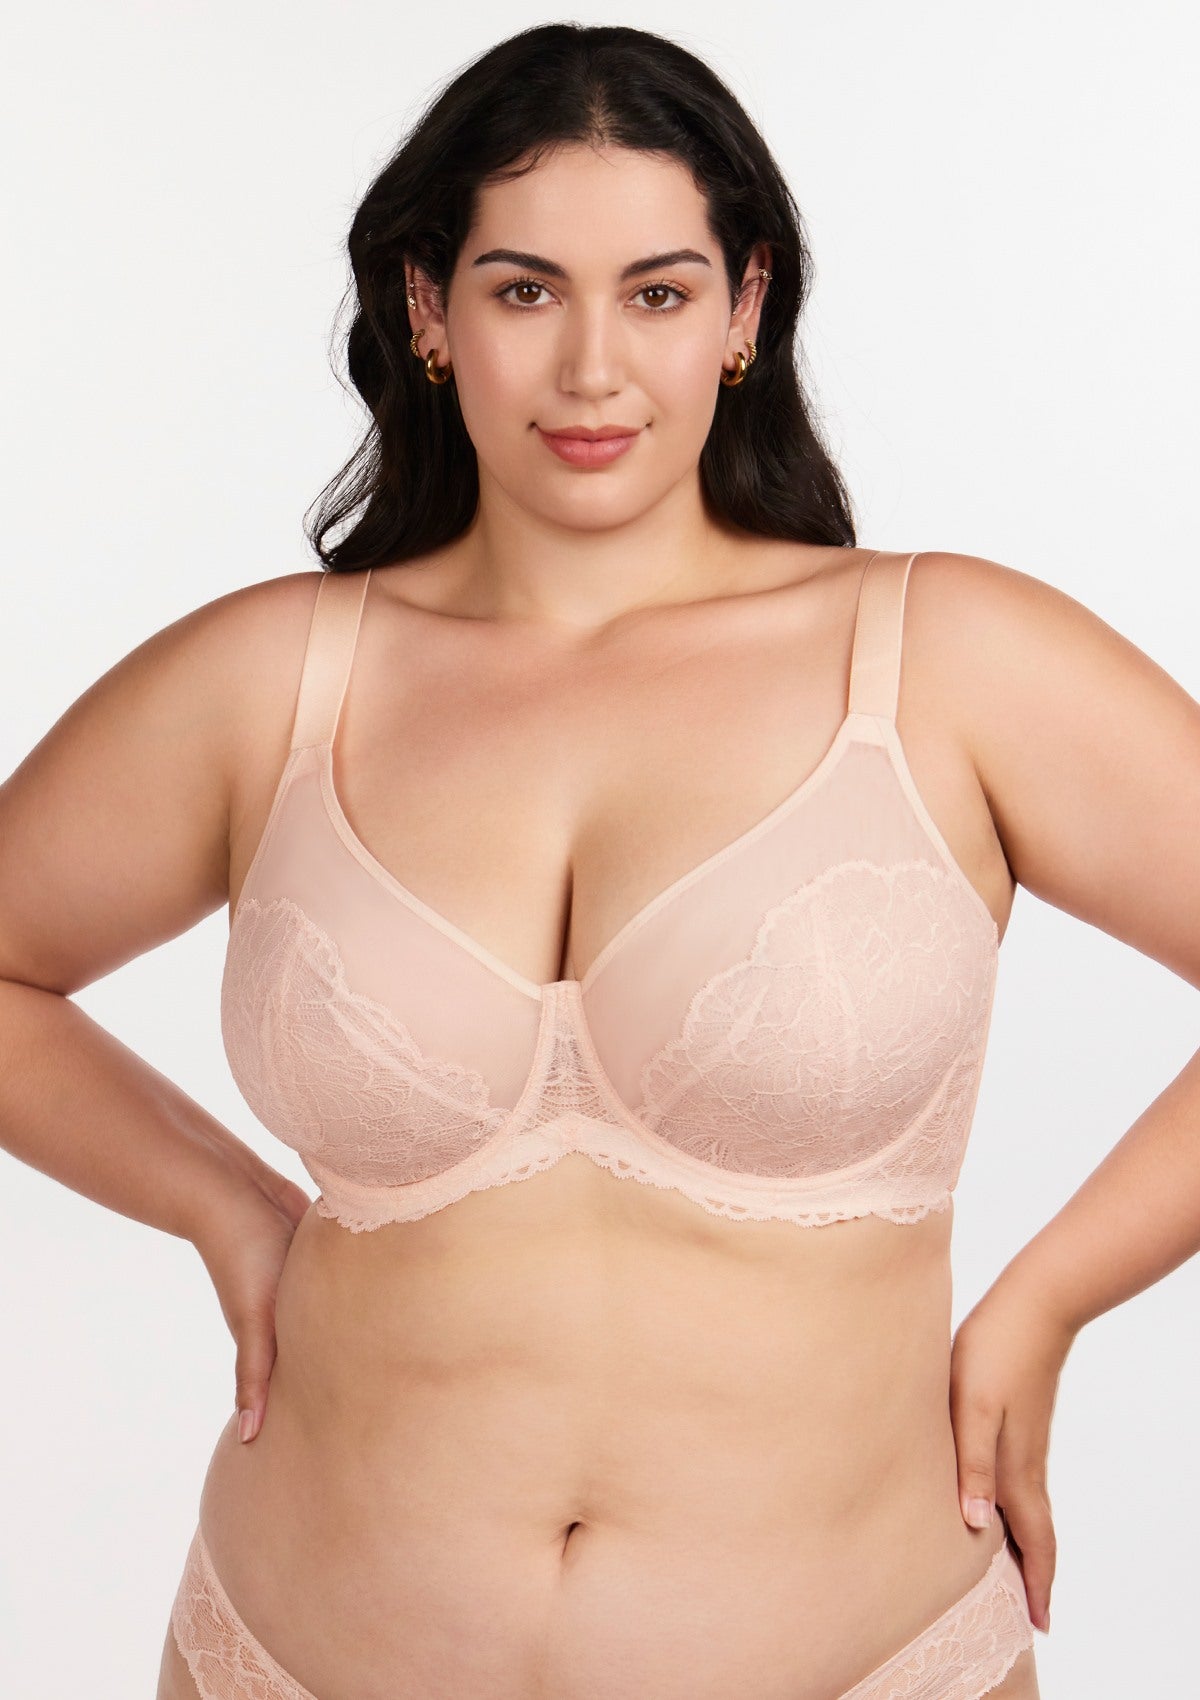 HSIA Blossom Sheer Lace Bra: Comfortable Underwire Bra For Big Busts - White / 36 / H